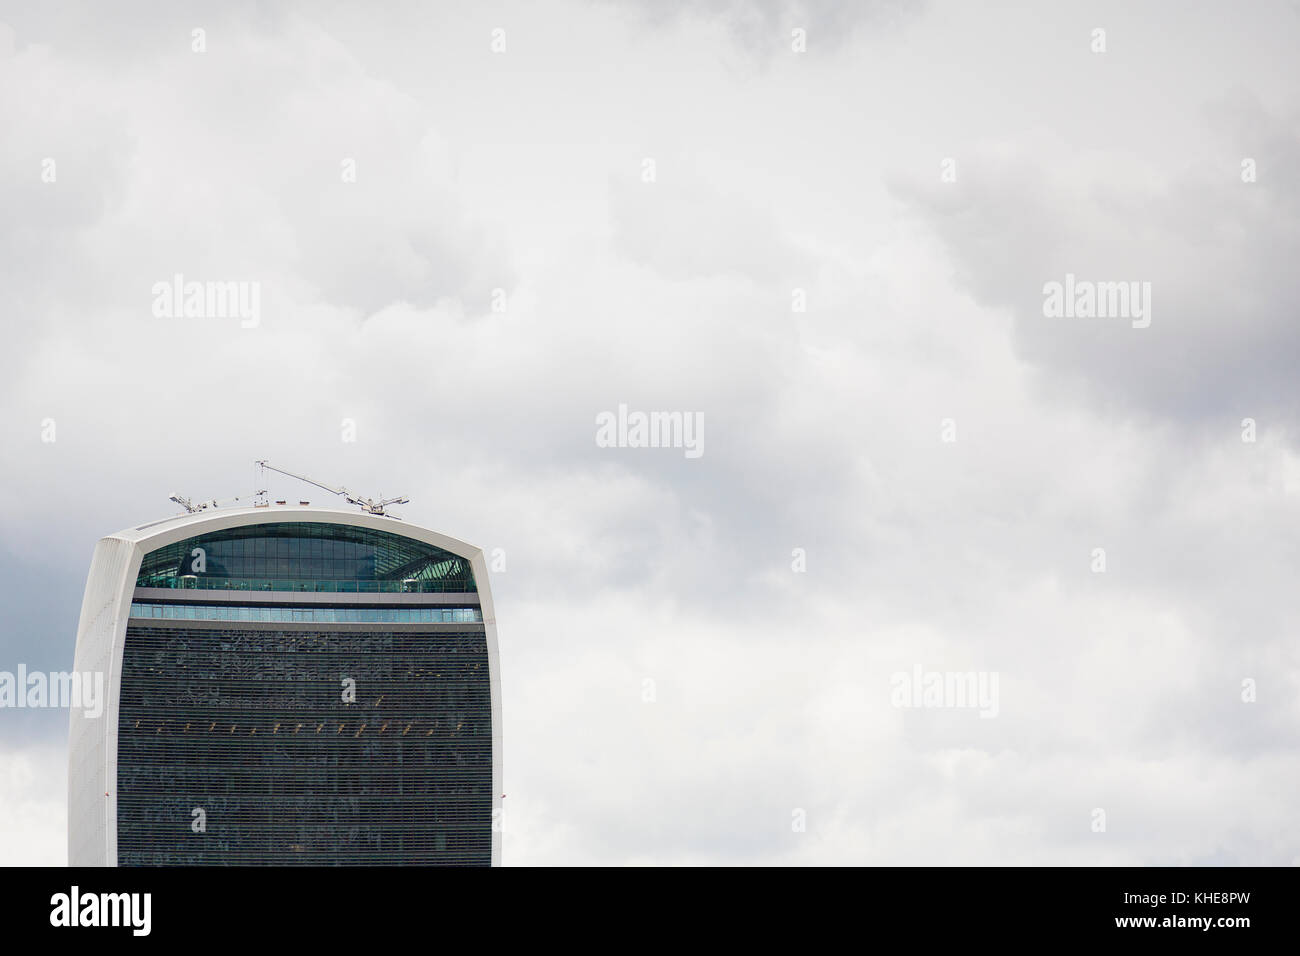 London, UK. 20 Fenchurch Street (the Walkie Talkie building) alone against a grey cloudy sky. Stock Photo